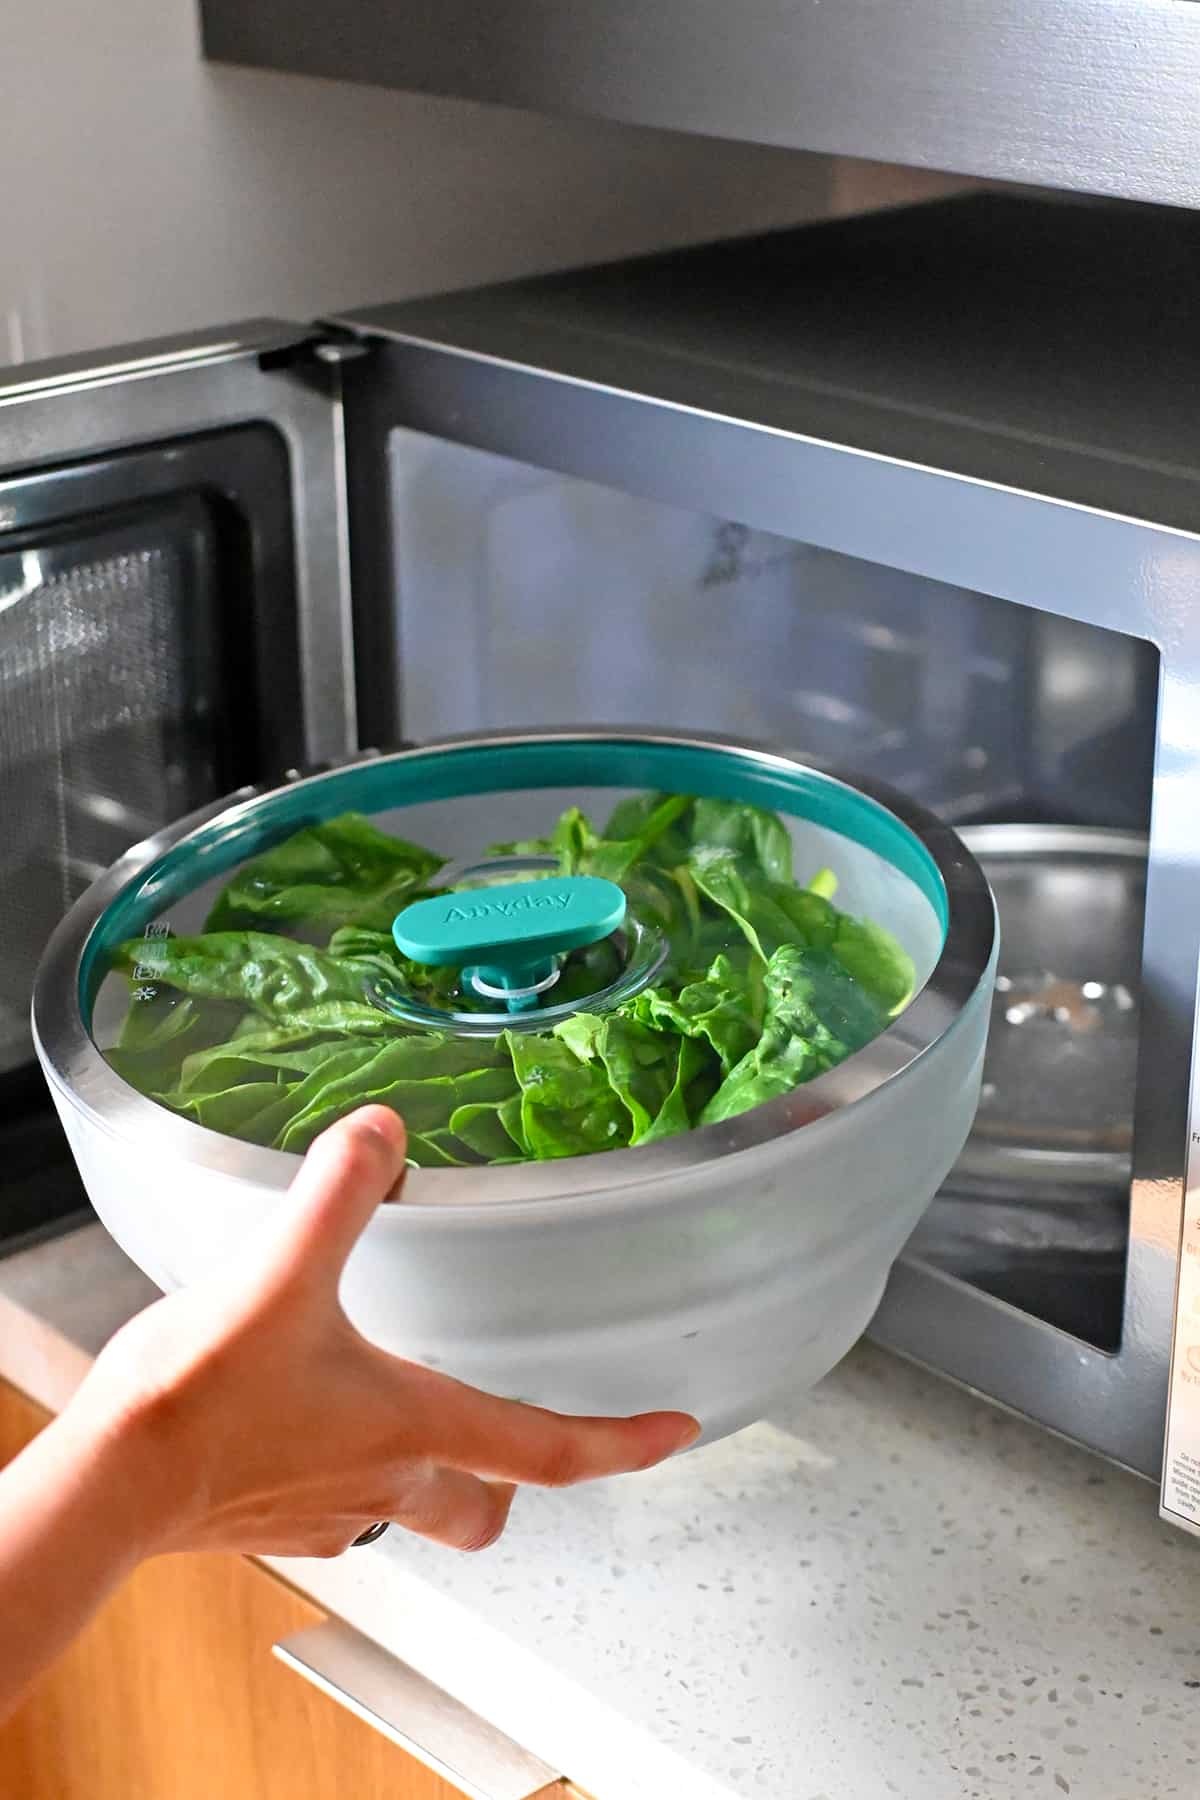 A hand is placing an extra large glass Anyday microwave container filled with raw spinach into an open microwave.